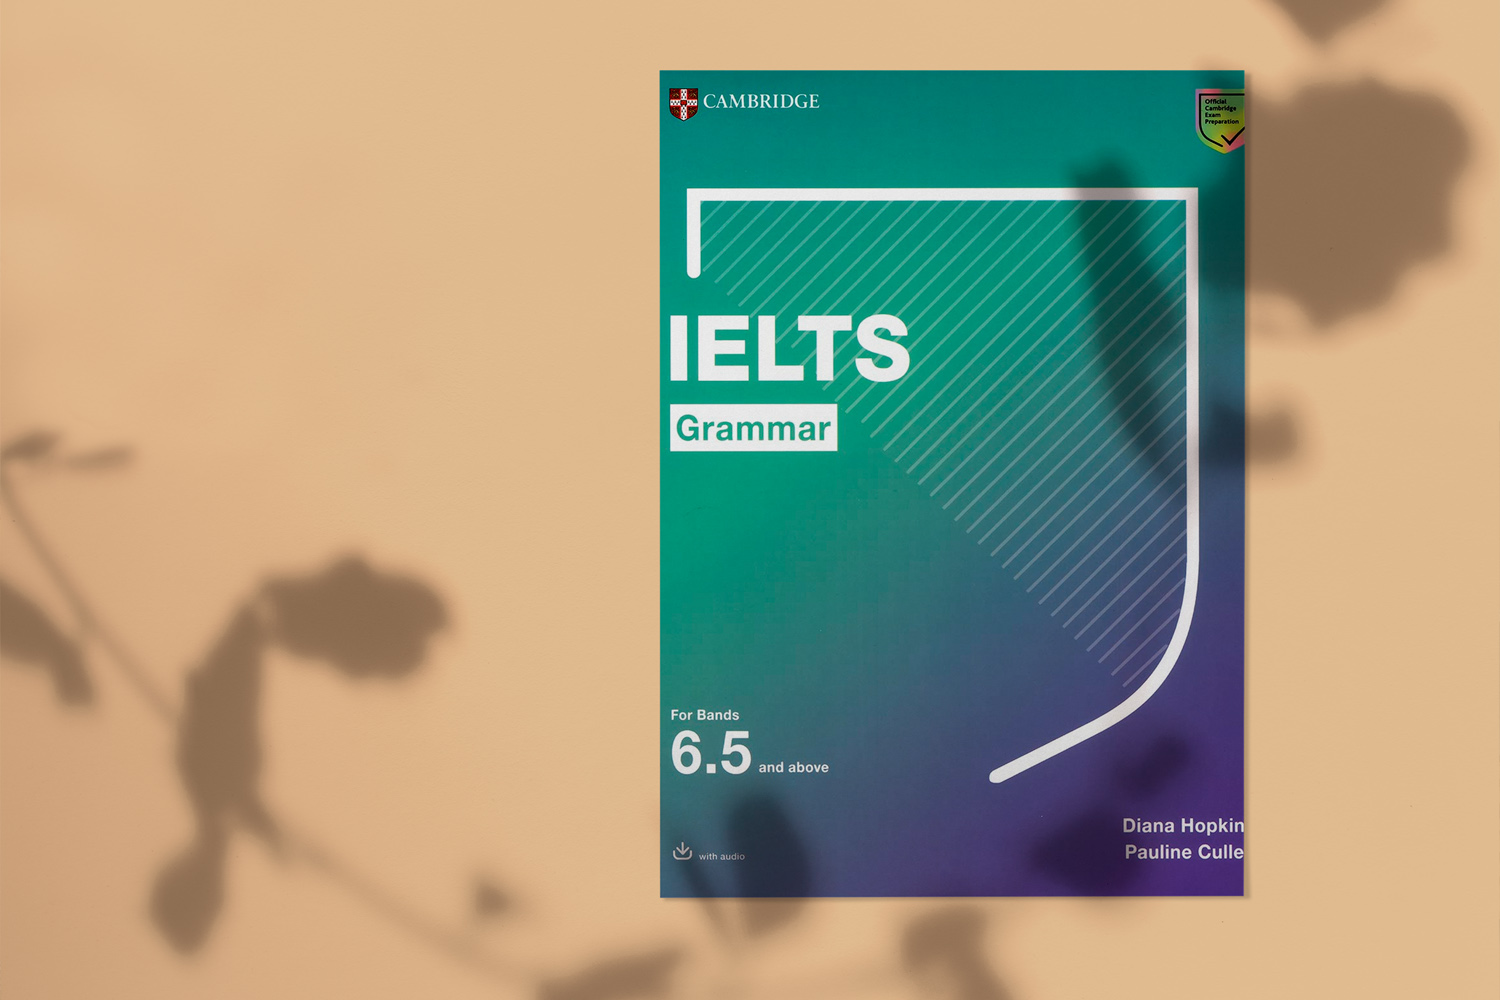 IELTS Grammar - For Bands 6.5 and above